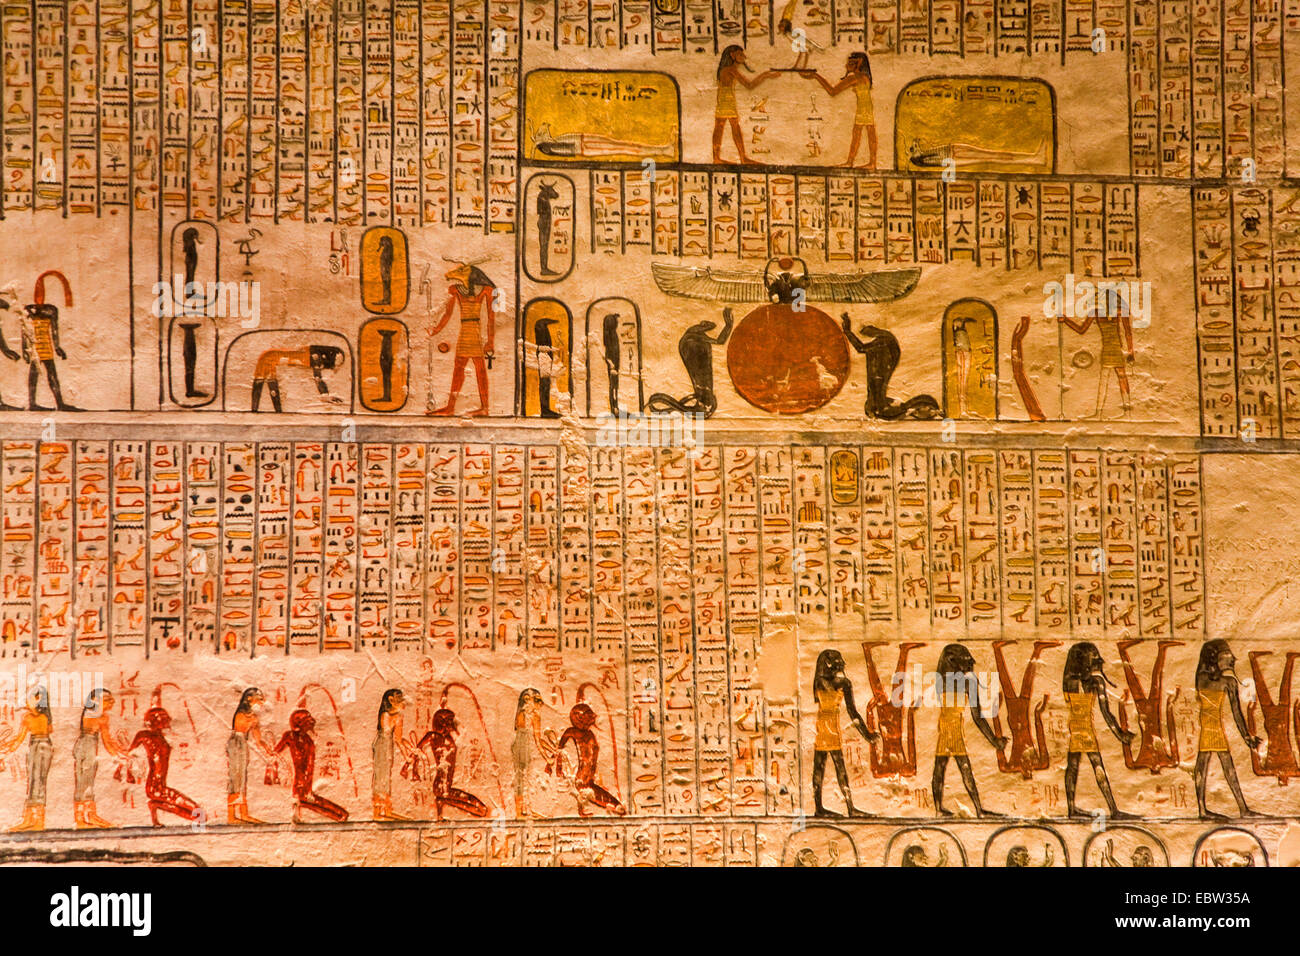 wall paintings and hieroglyphics in the chamber tomb of Ramses V. (1150-1145 BC) and Ramses VI. (1145-1137 BC), Egypt, Valley of the Kings, Luxor Stock Photo